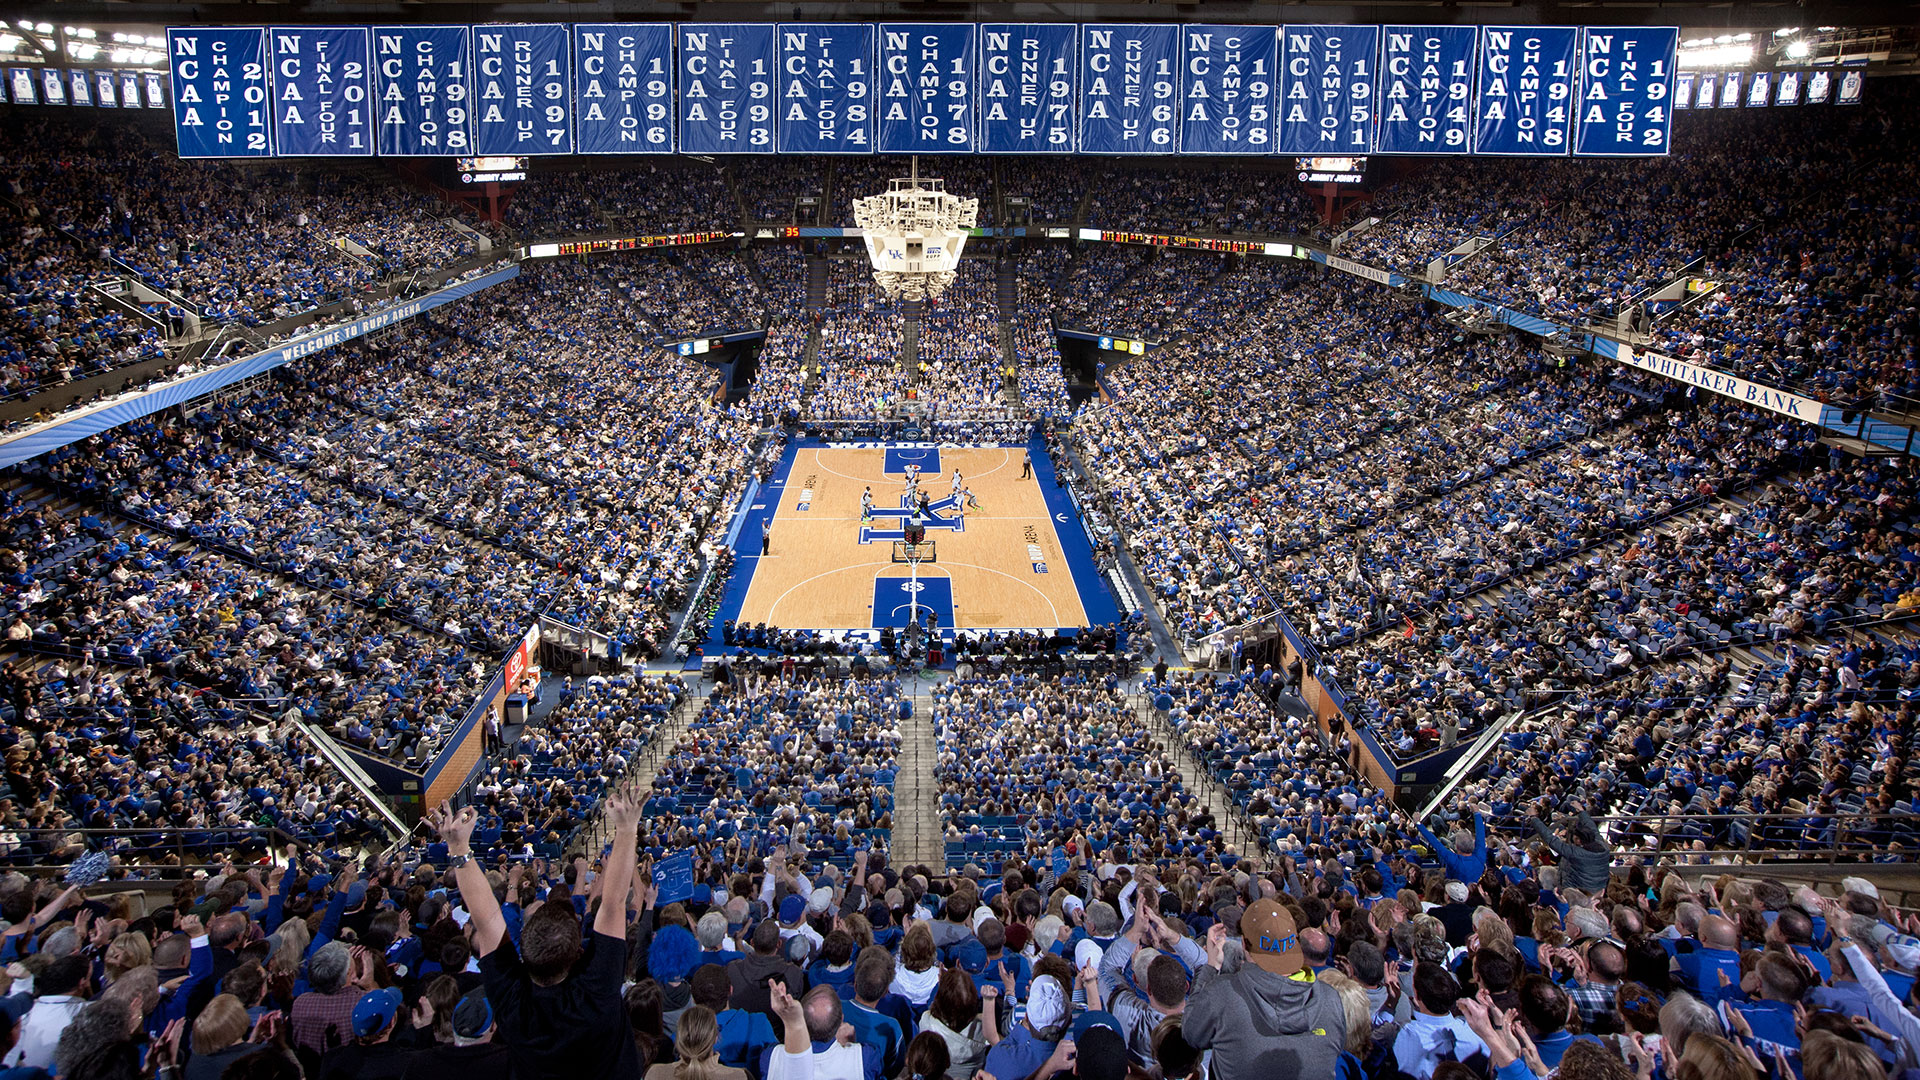 An exciting desktop wallpaper for the real University of Kentucky